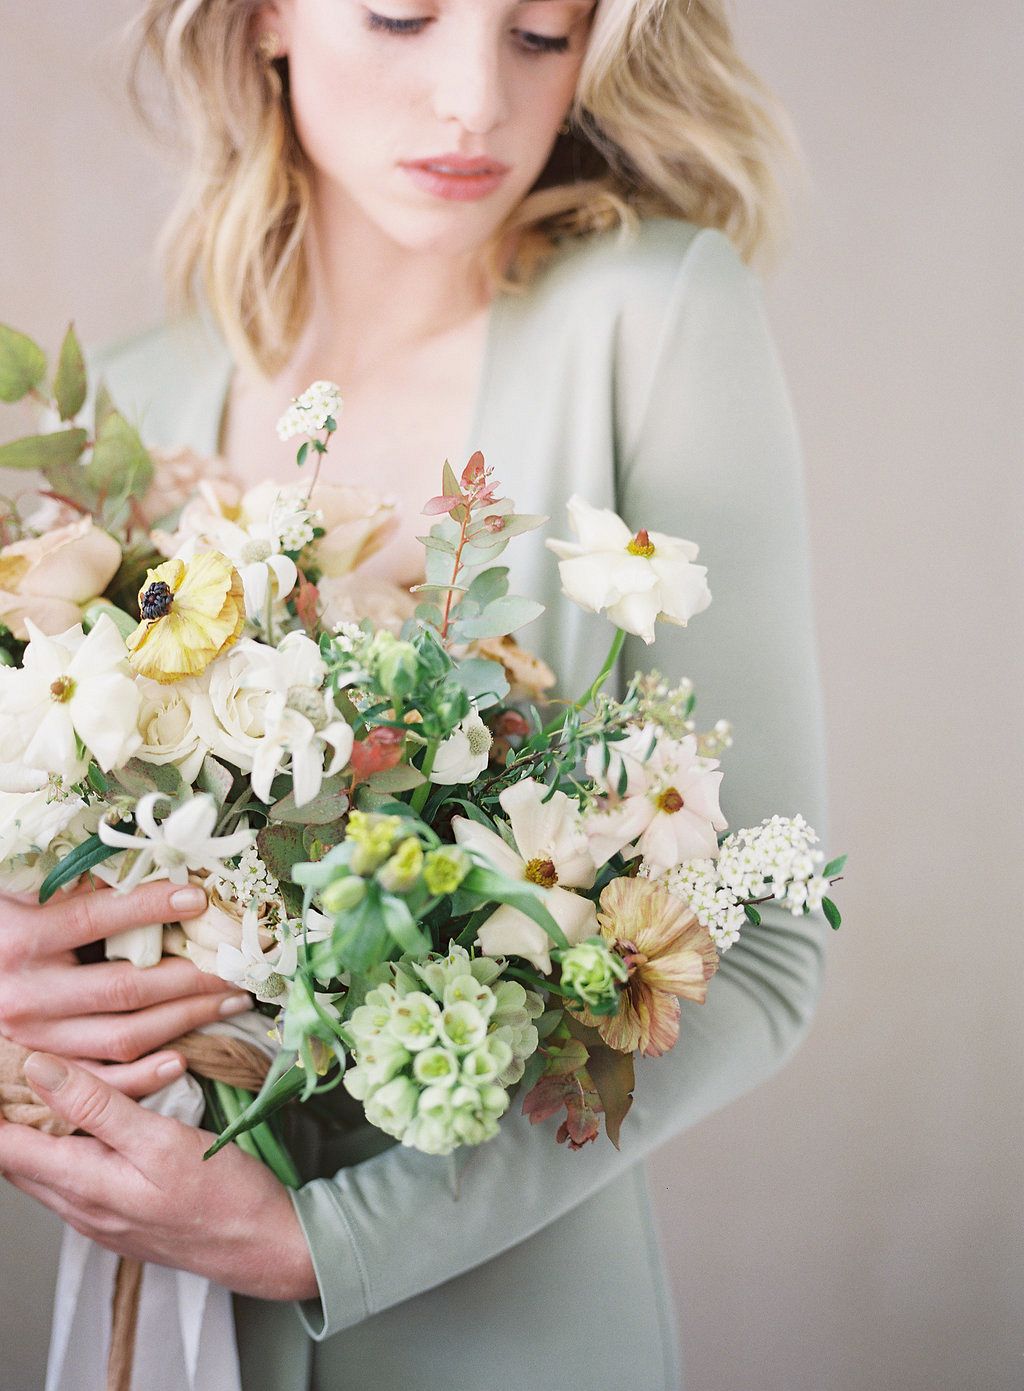 Contemporary and Feminine Bridal Session with an Organic Bouquet